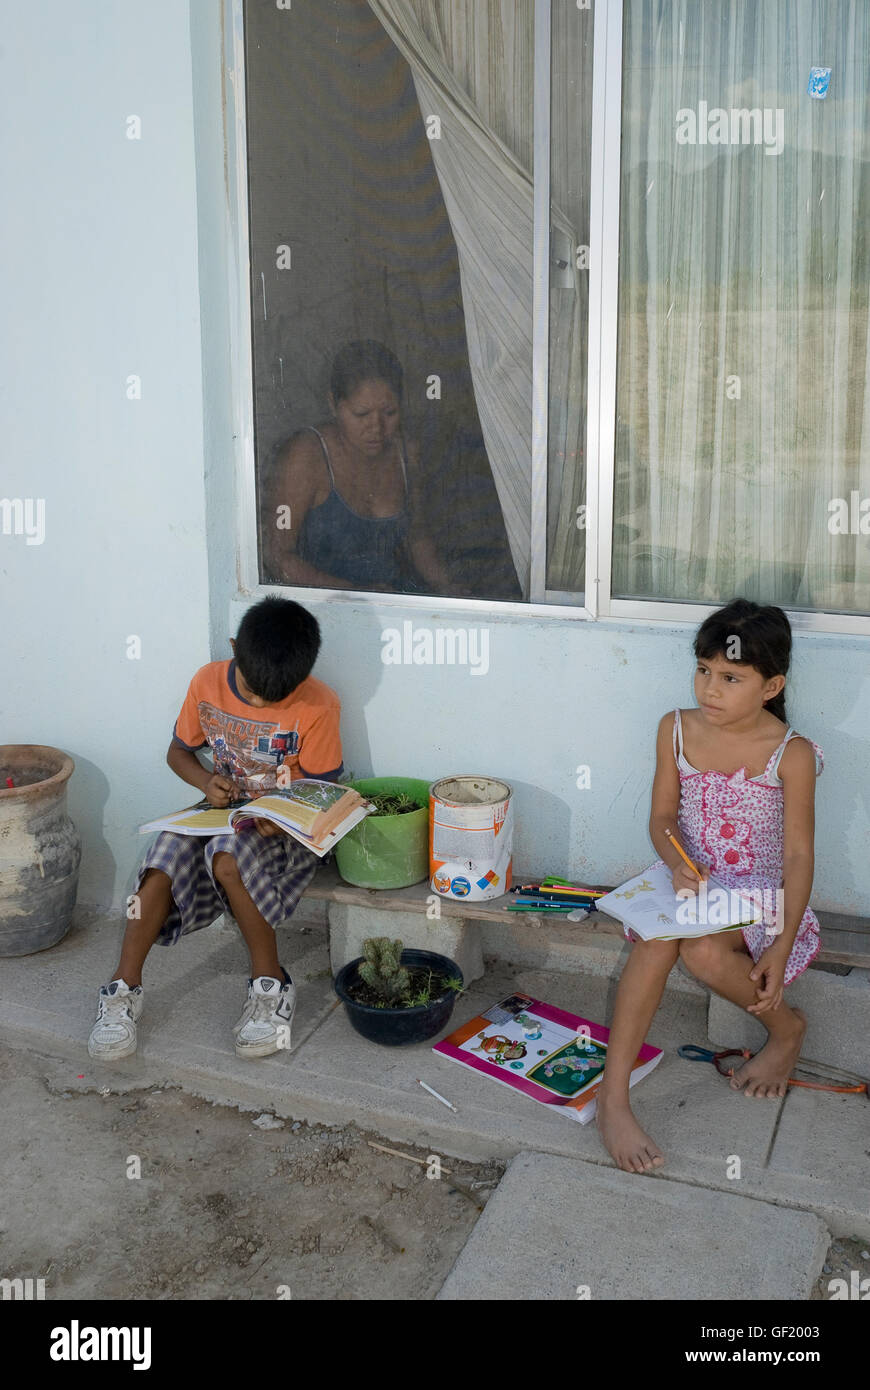 Young boy and girl do their homework outside the window of their house in Escobedo, Nuevo León state, Mexico. Stock Photo